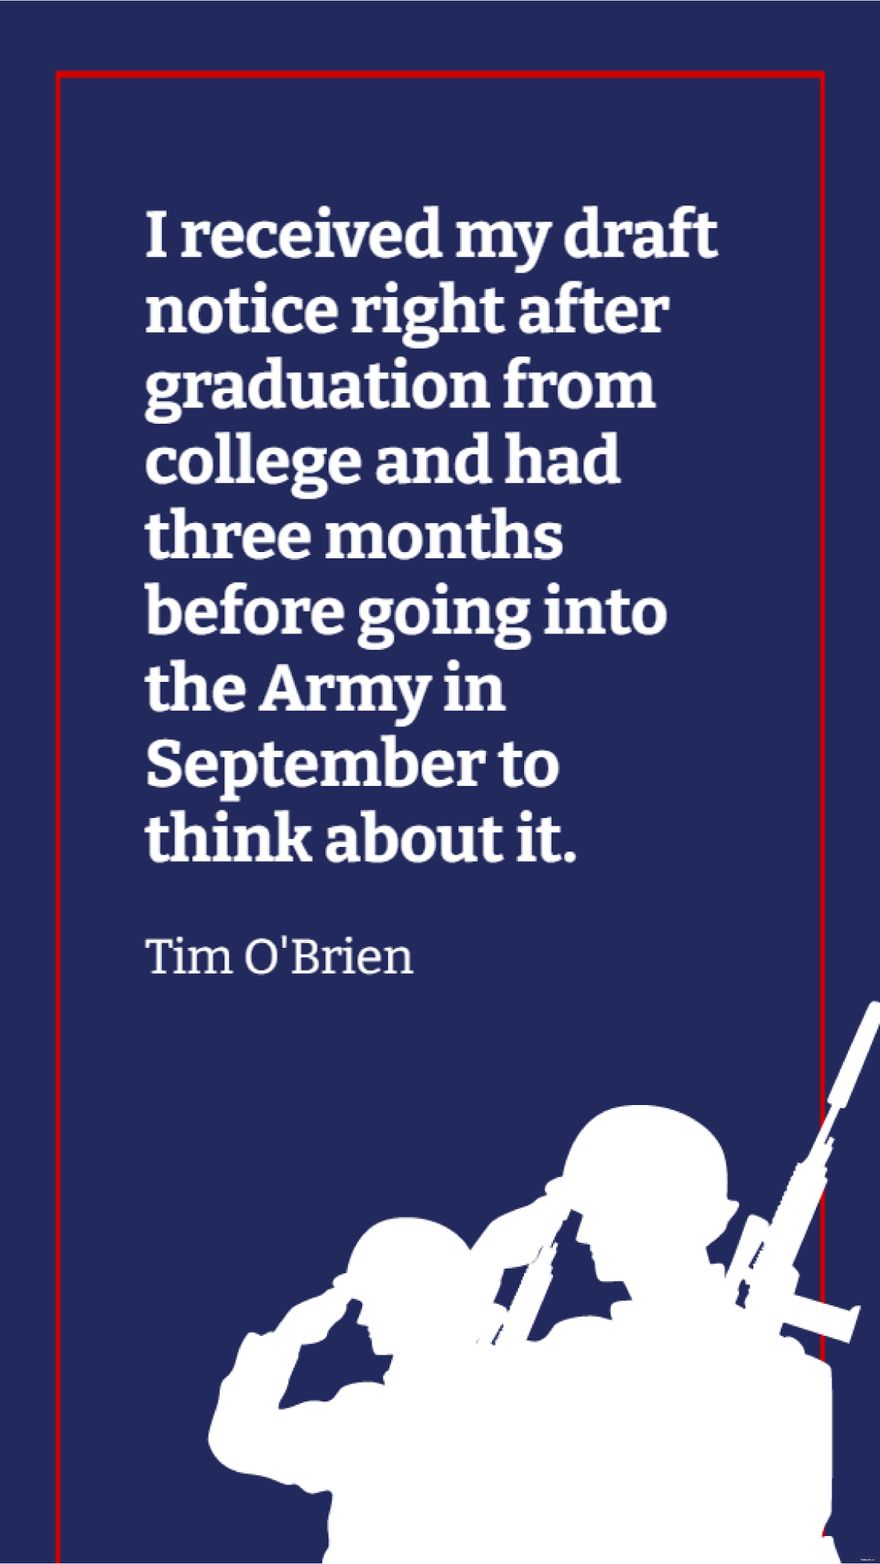 Free Tim O'Brien - I received my draft notice right after graduation from college and had three months before going into the Army in September to think about it.